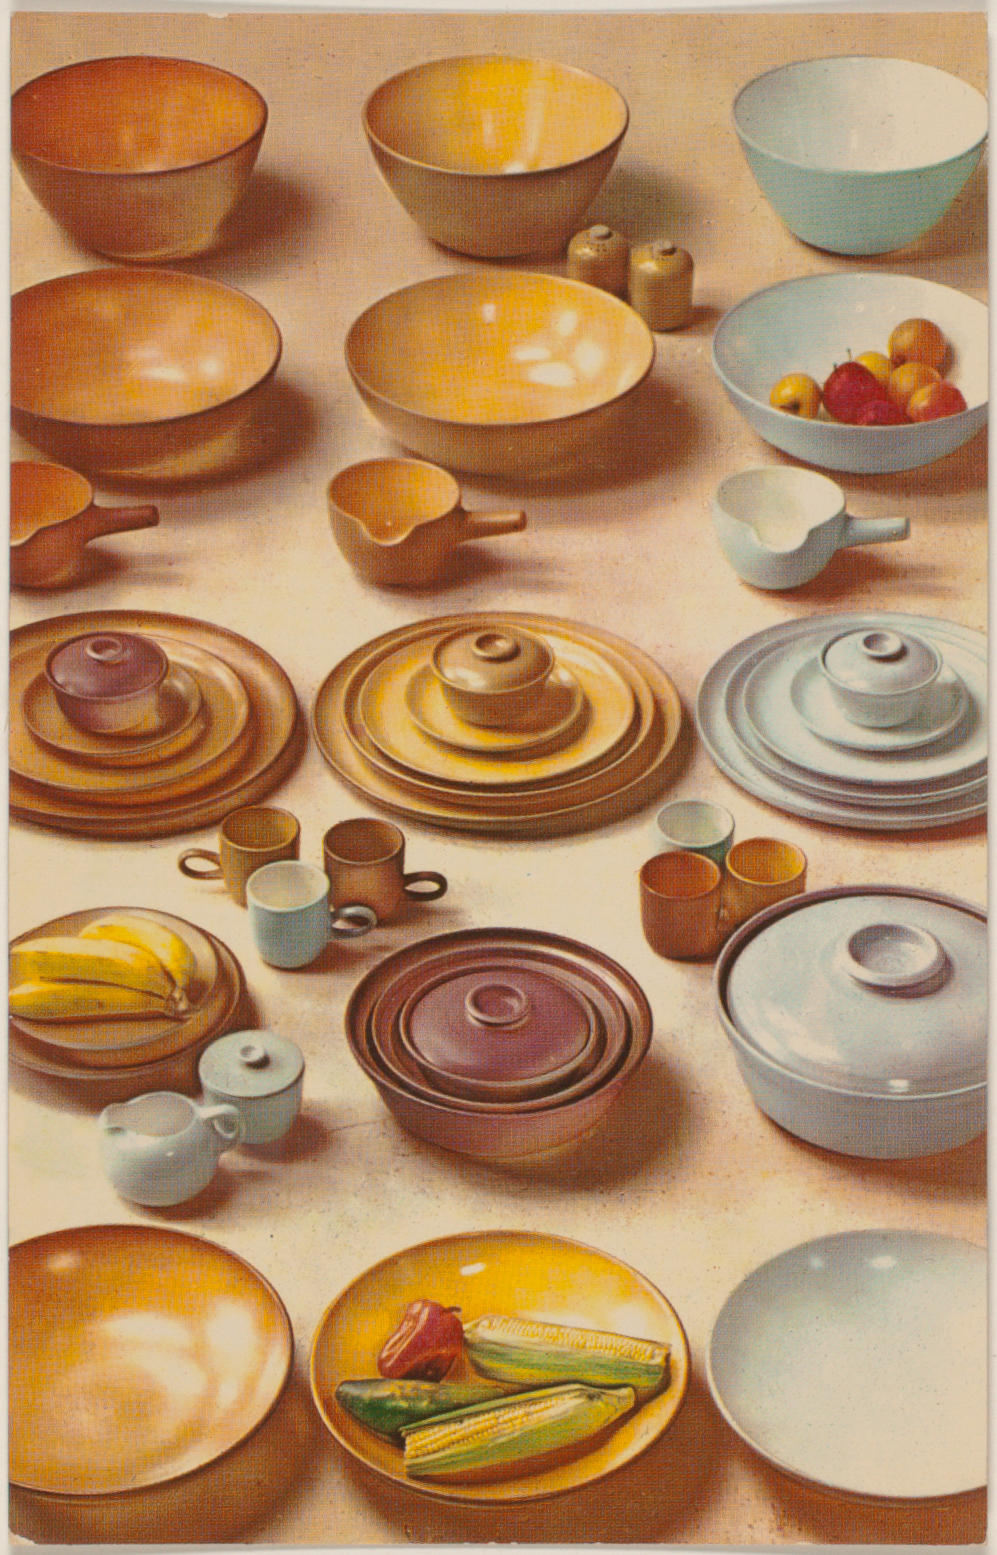 Plates, bowls, cups and other Heath dinnerware in yellow, purple and blue tones, with decorative fruits.